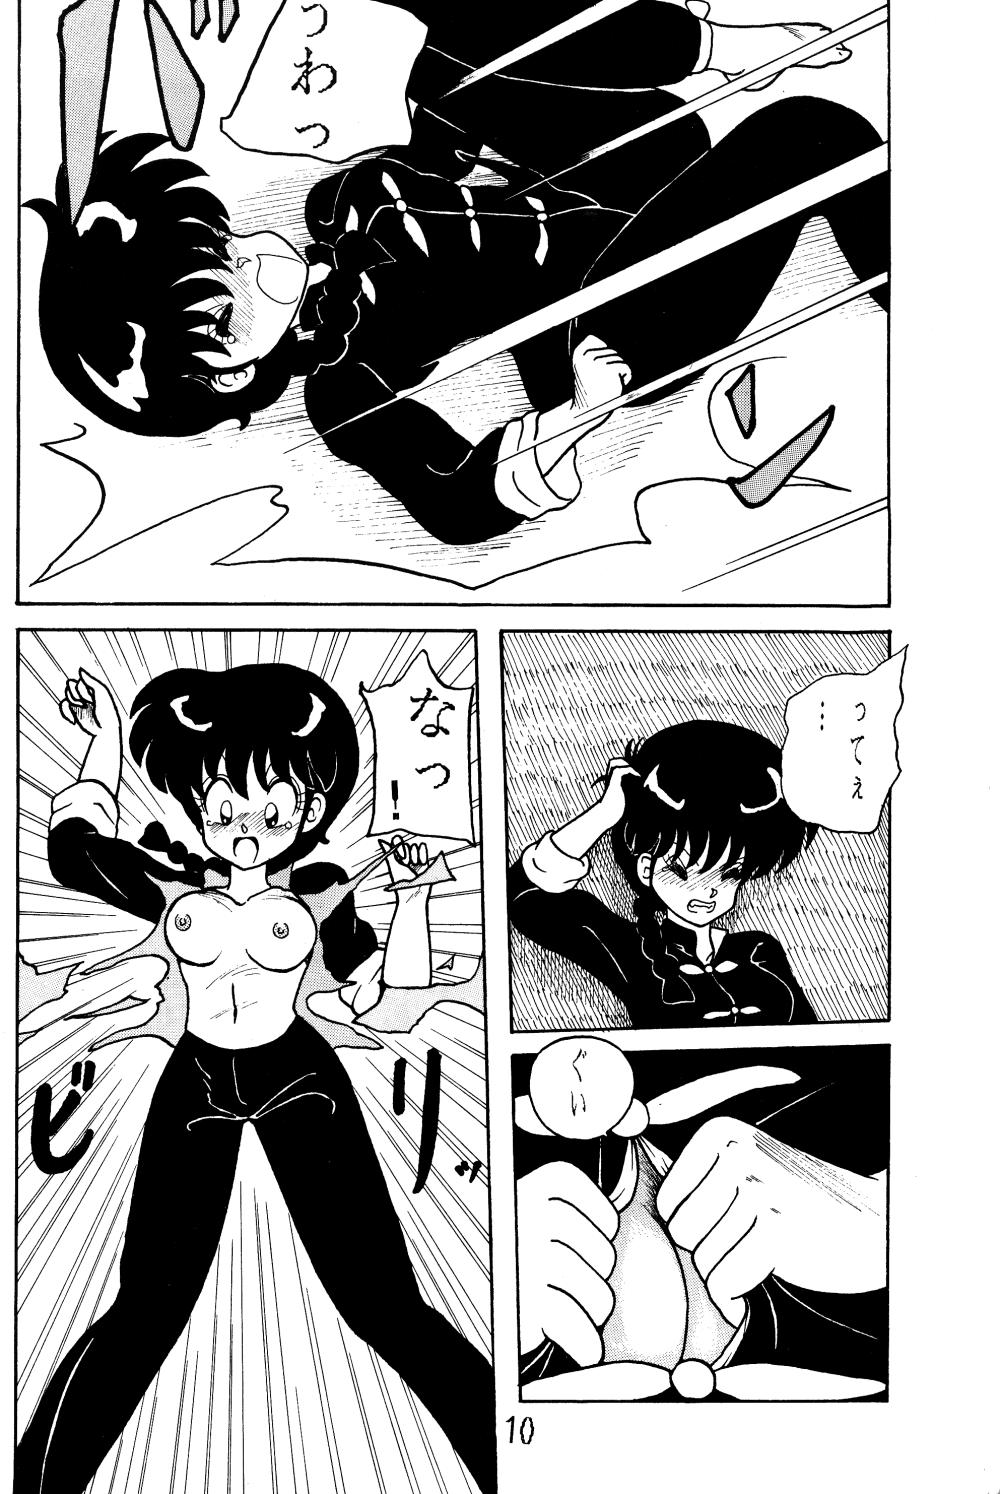 NOTORIOUS Ranma 1/2 Special 9